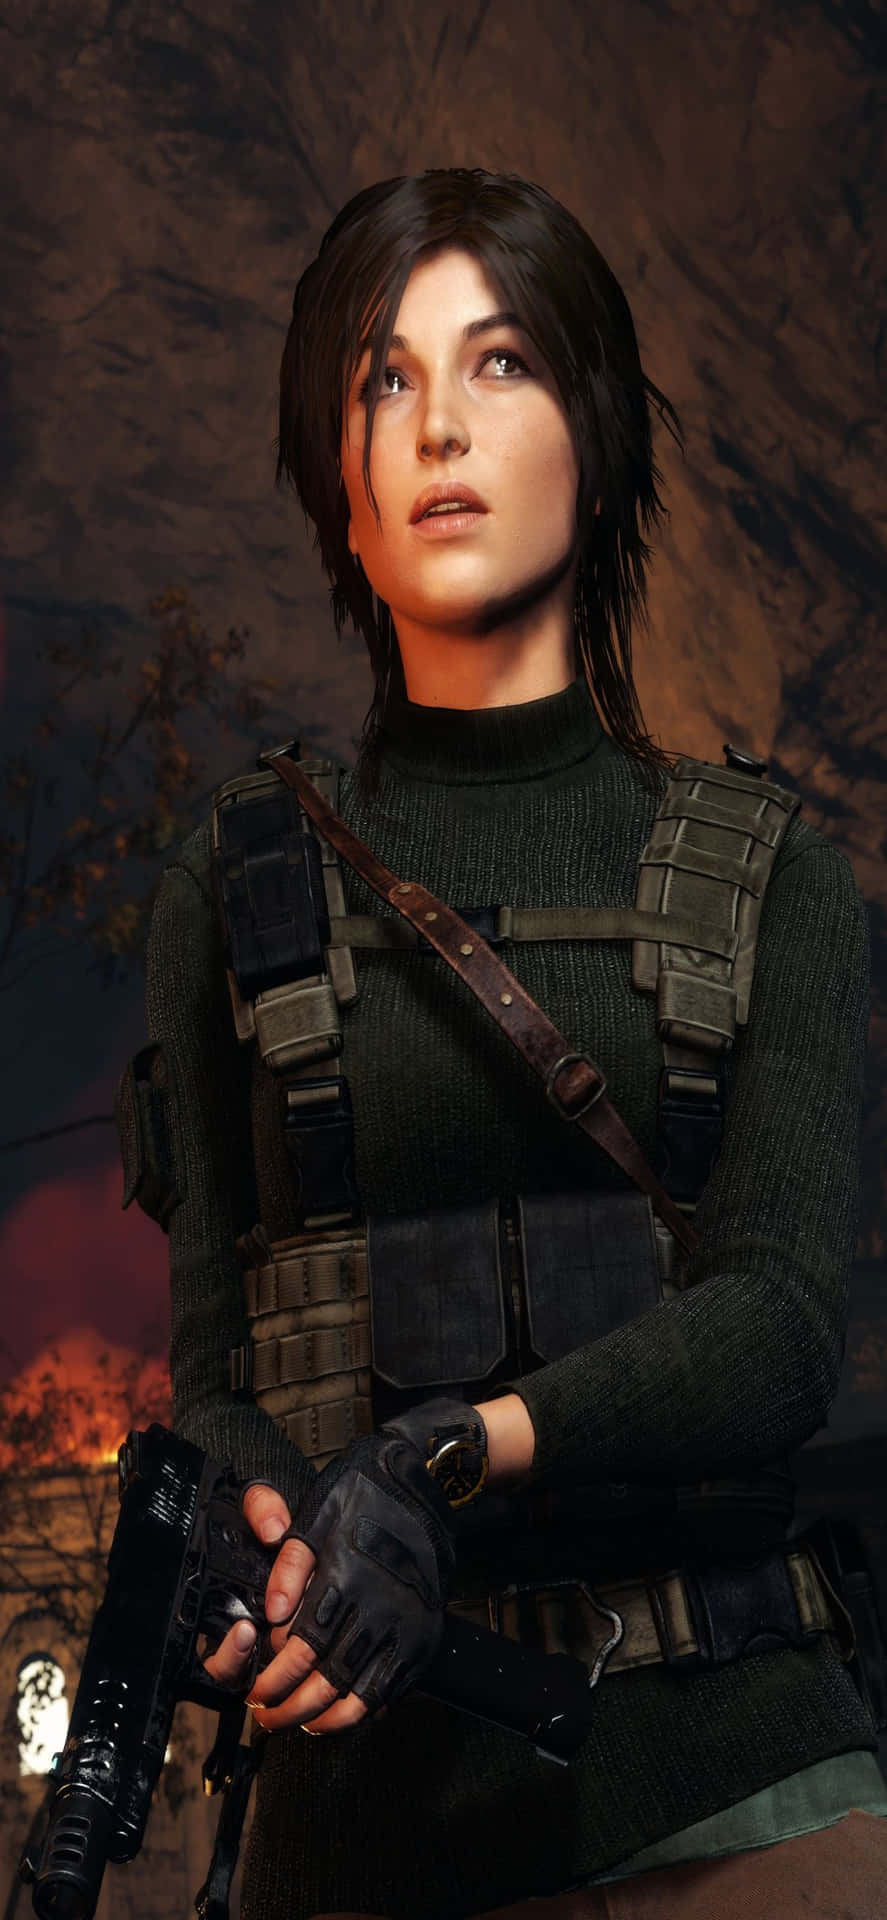 Iphone X Rise Of The Tomb Raider Background 1125 X 2436 Background